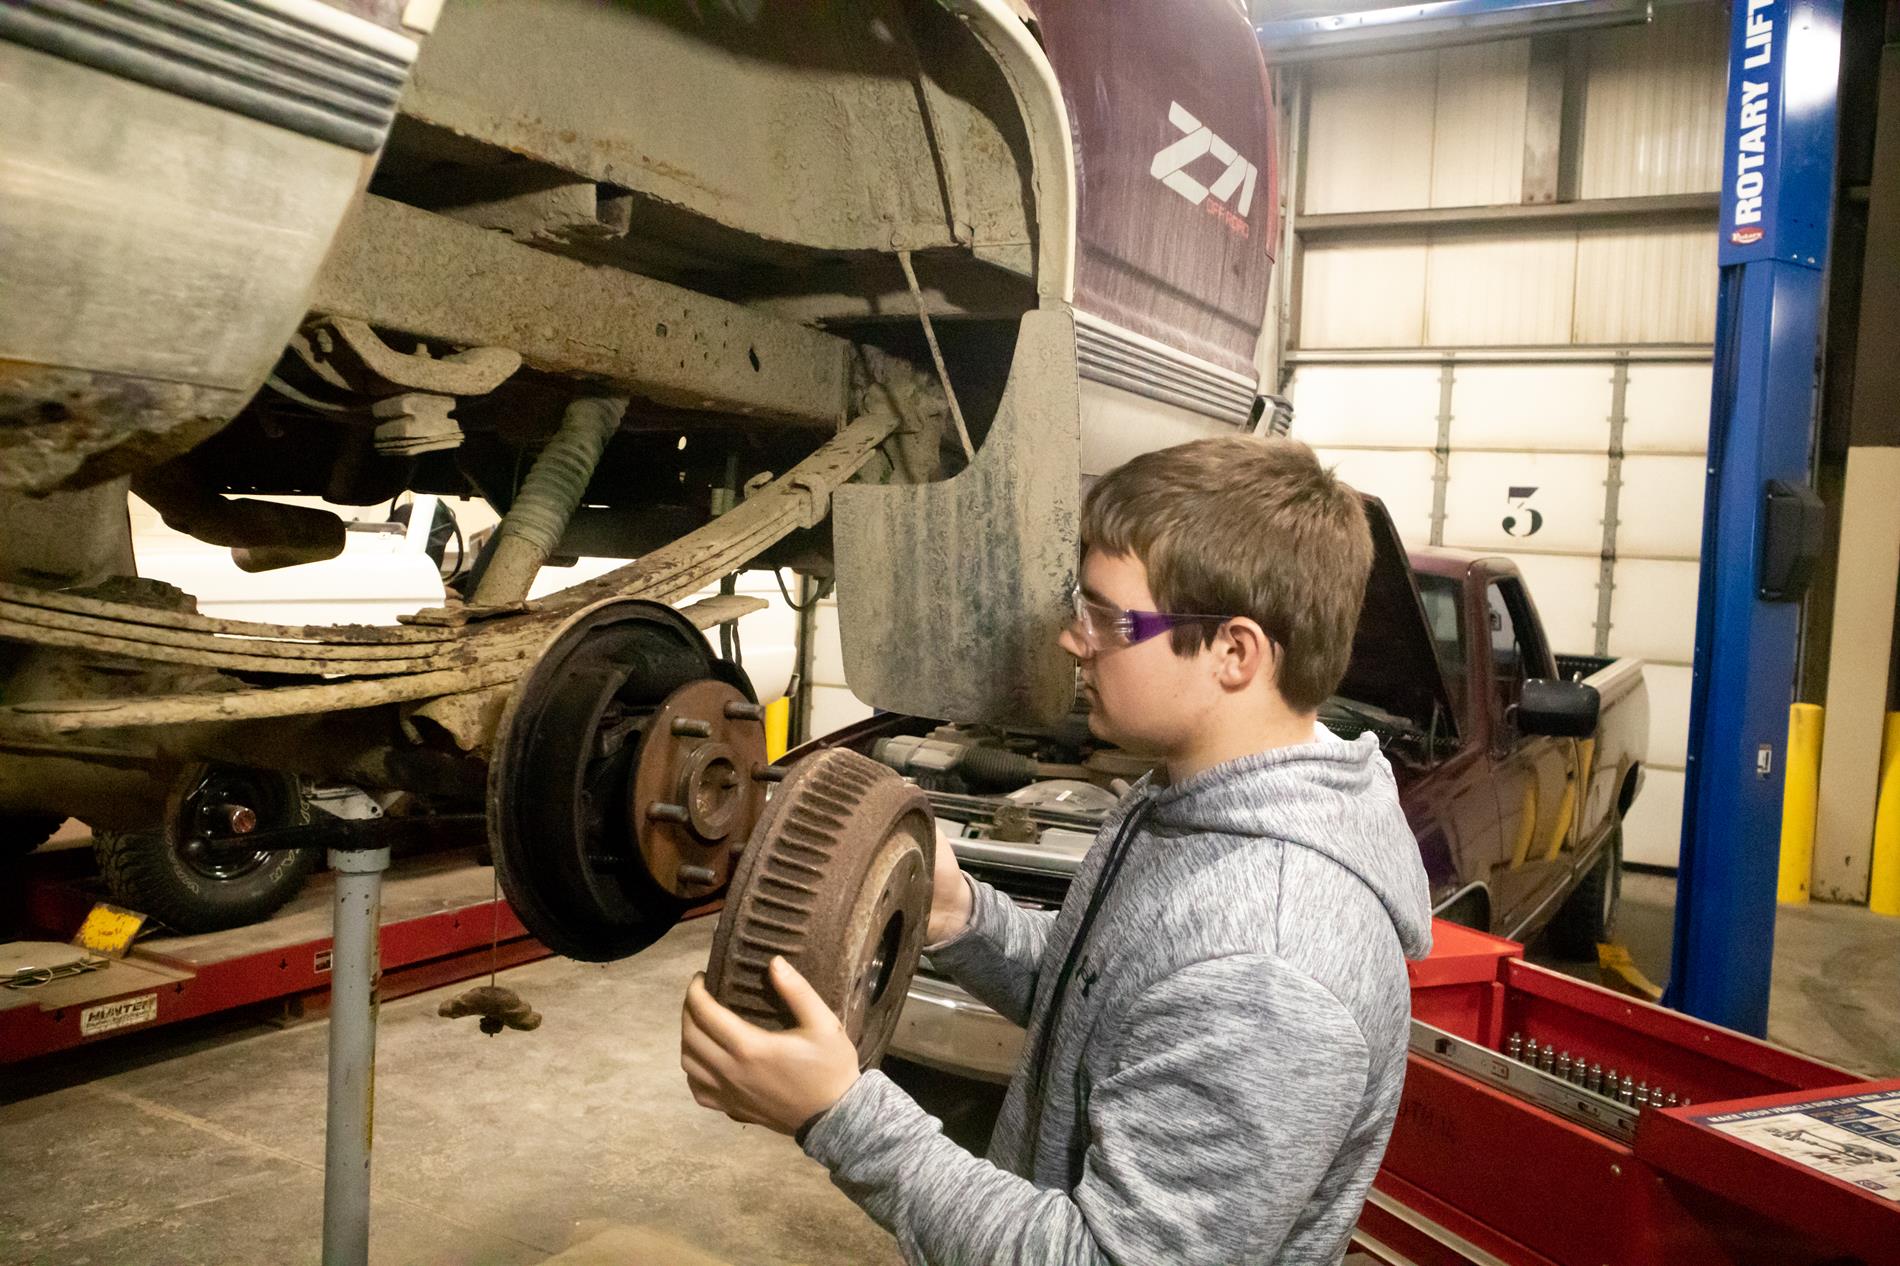 Students work on clients' cars throughout the week.